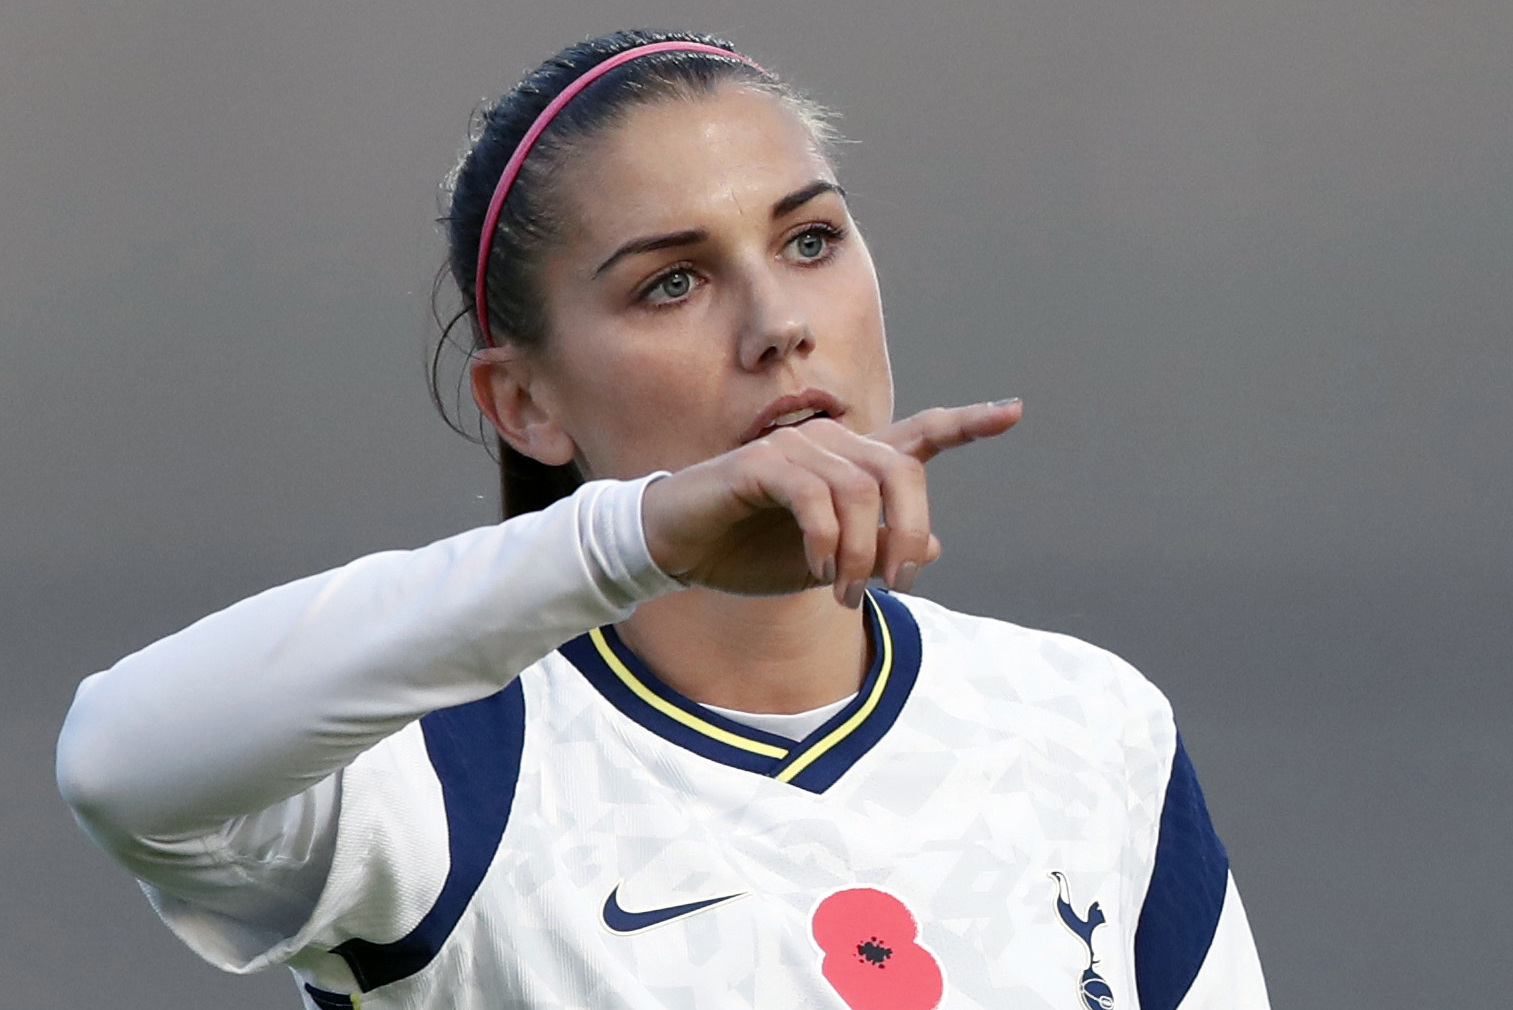 U S Women S Soccer Star Alex Morgan Recovering After Covid 19 Diagnosis Bleacher Report Latest News Videos And Highlights